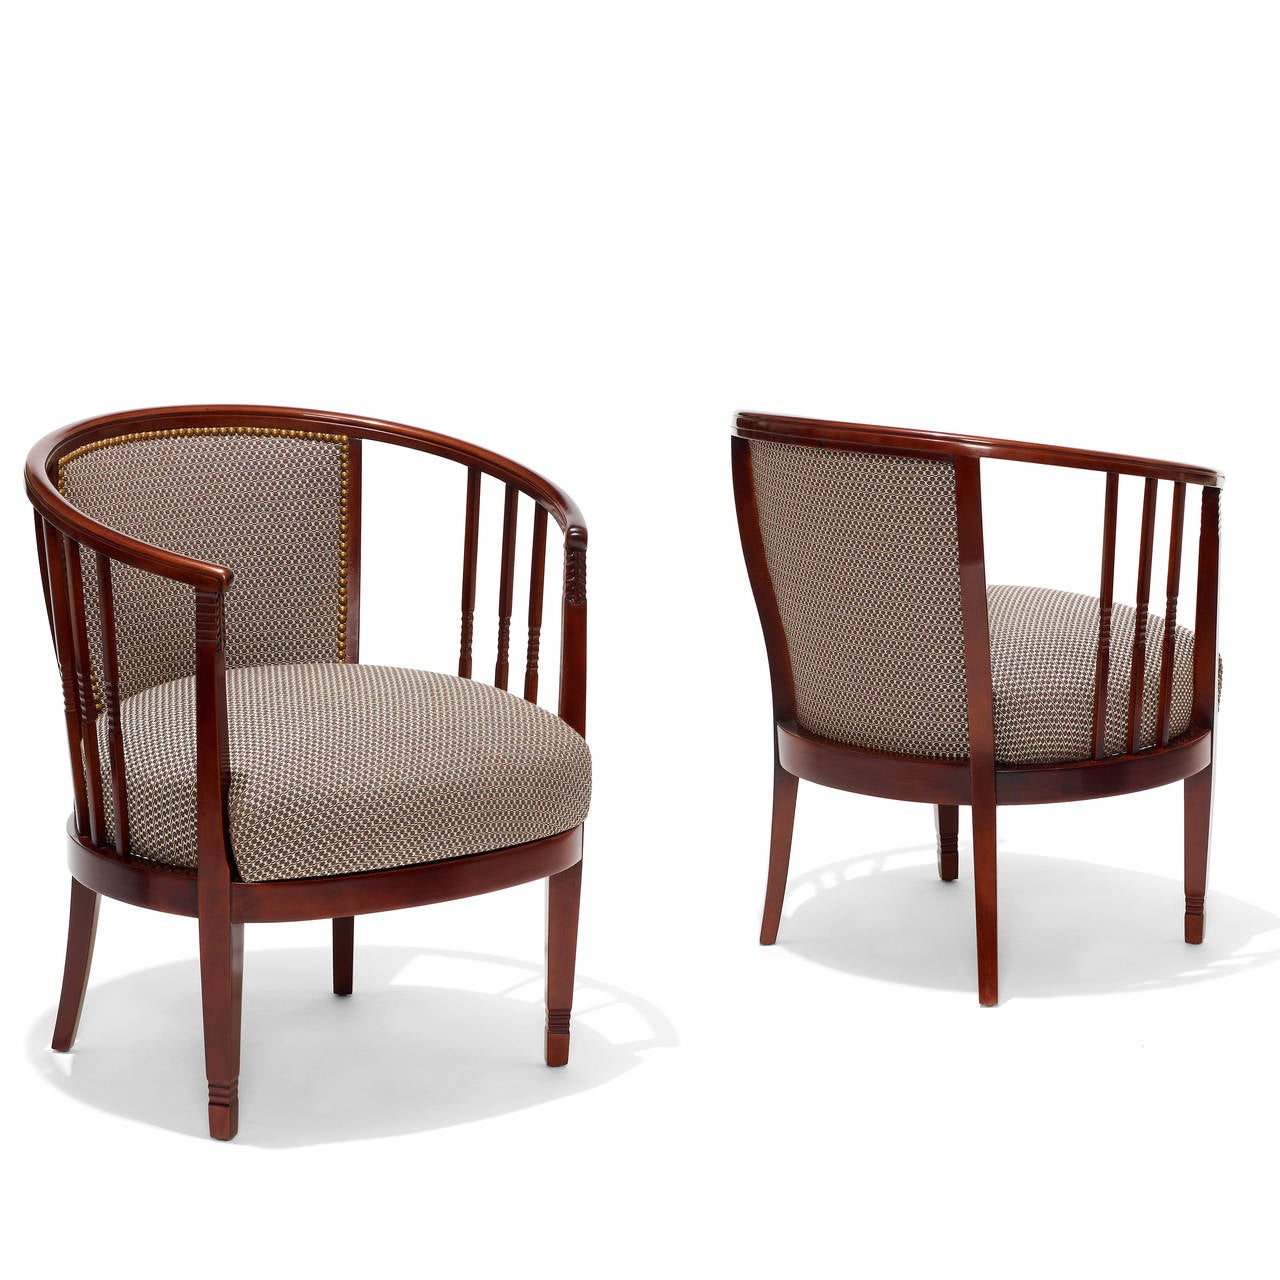 Striking pair of Arts and Crafts armchairs having an oval footprint, with continuous curved top rail angling down slightly from the upholstered back to form two curved arms. The arm supports feature handsome chip carving details. 

Most likely a